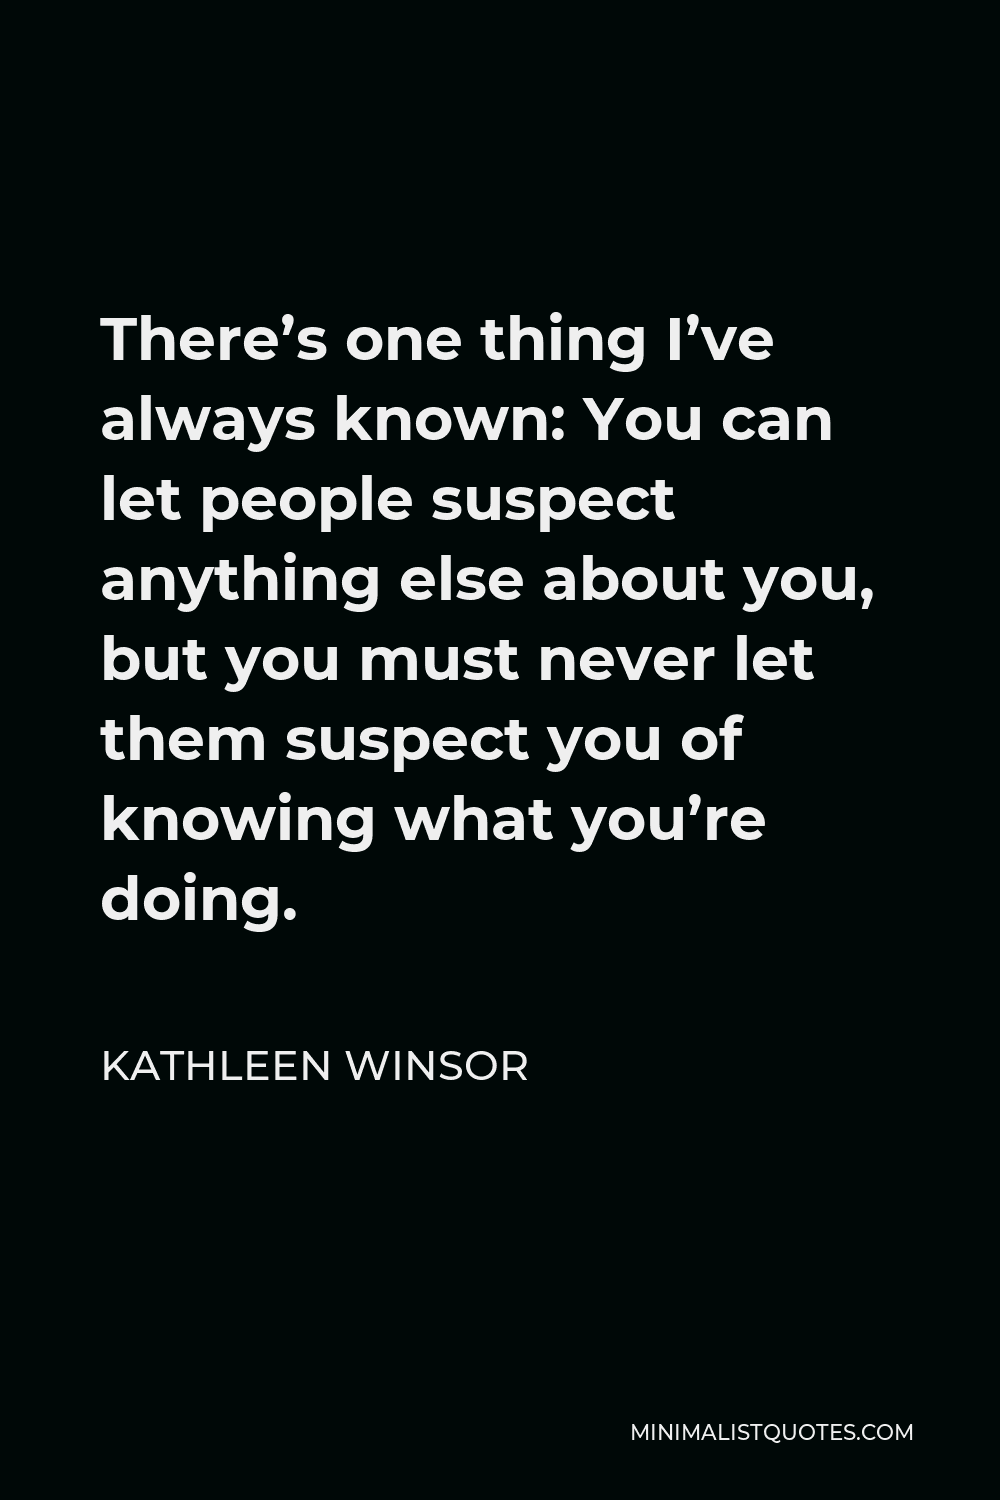 Kathleen Winsor Quote - There’s one thing I’ve always known: You can let people suspect anything else about you, but you must never let them suspect you of knowing what you’re doing.